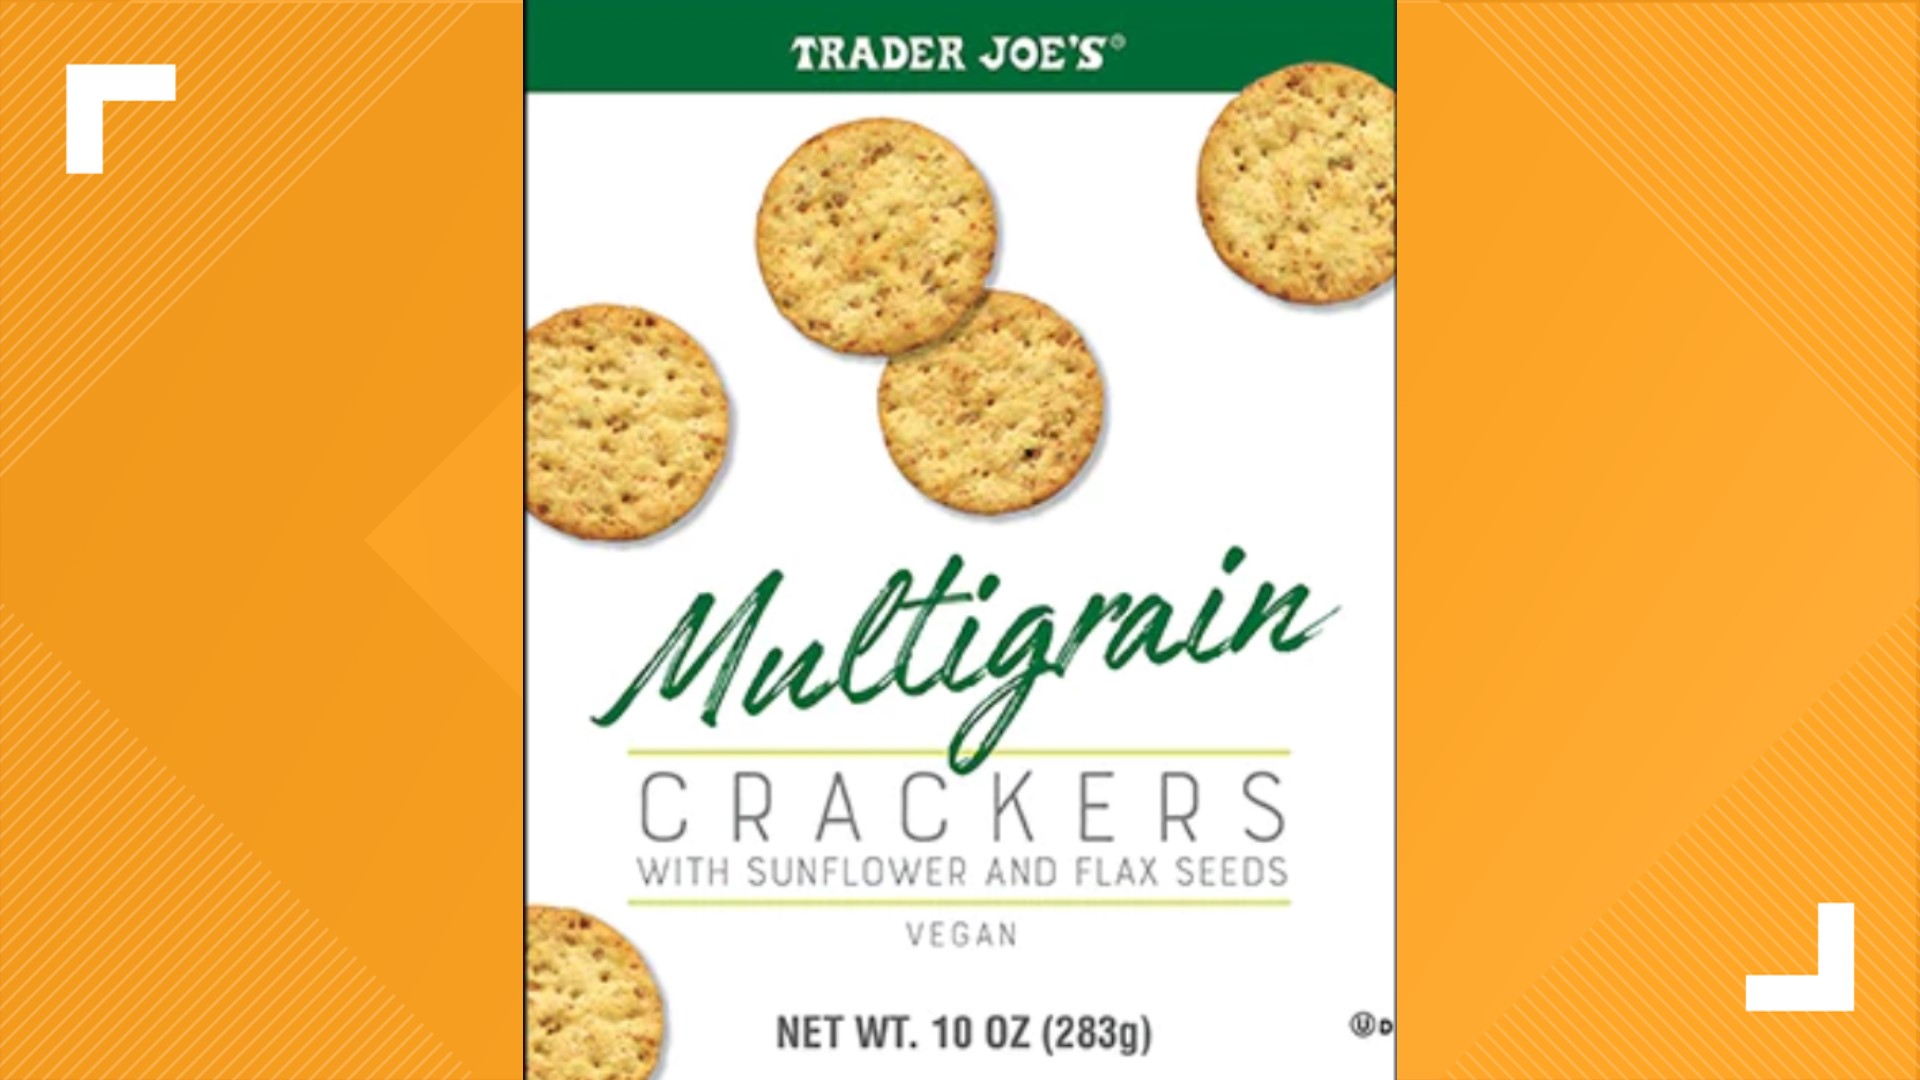 If you bought these crackers, you should check their best-by date to see if they're part of the recall.